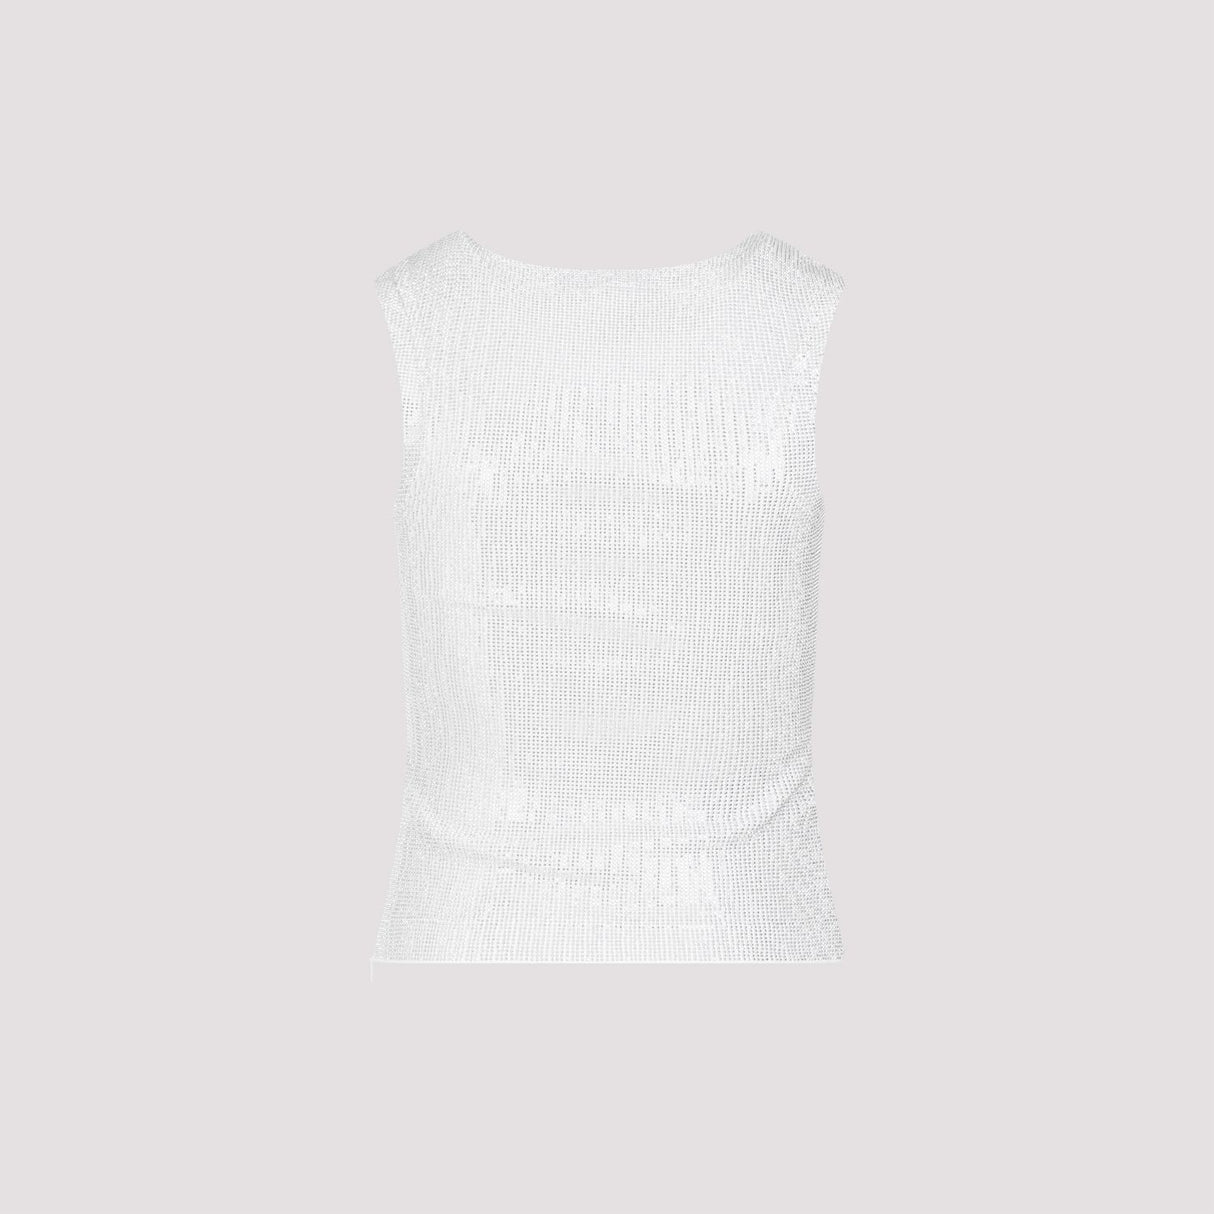 ERMANNO SCERVINO Metallic Knit Tank Top for Women, SS24 Collection